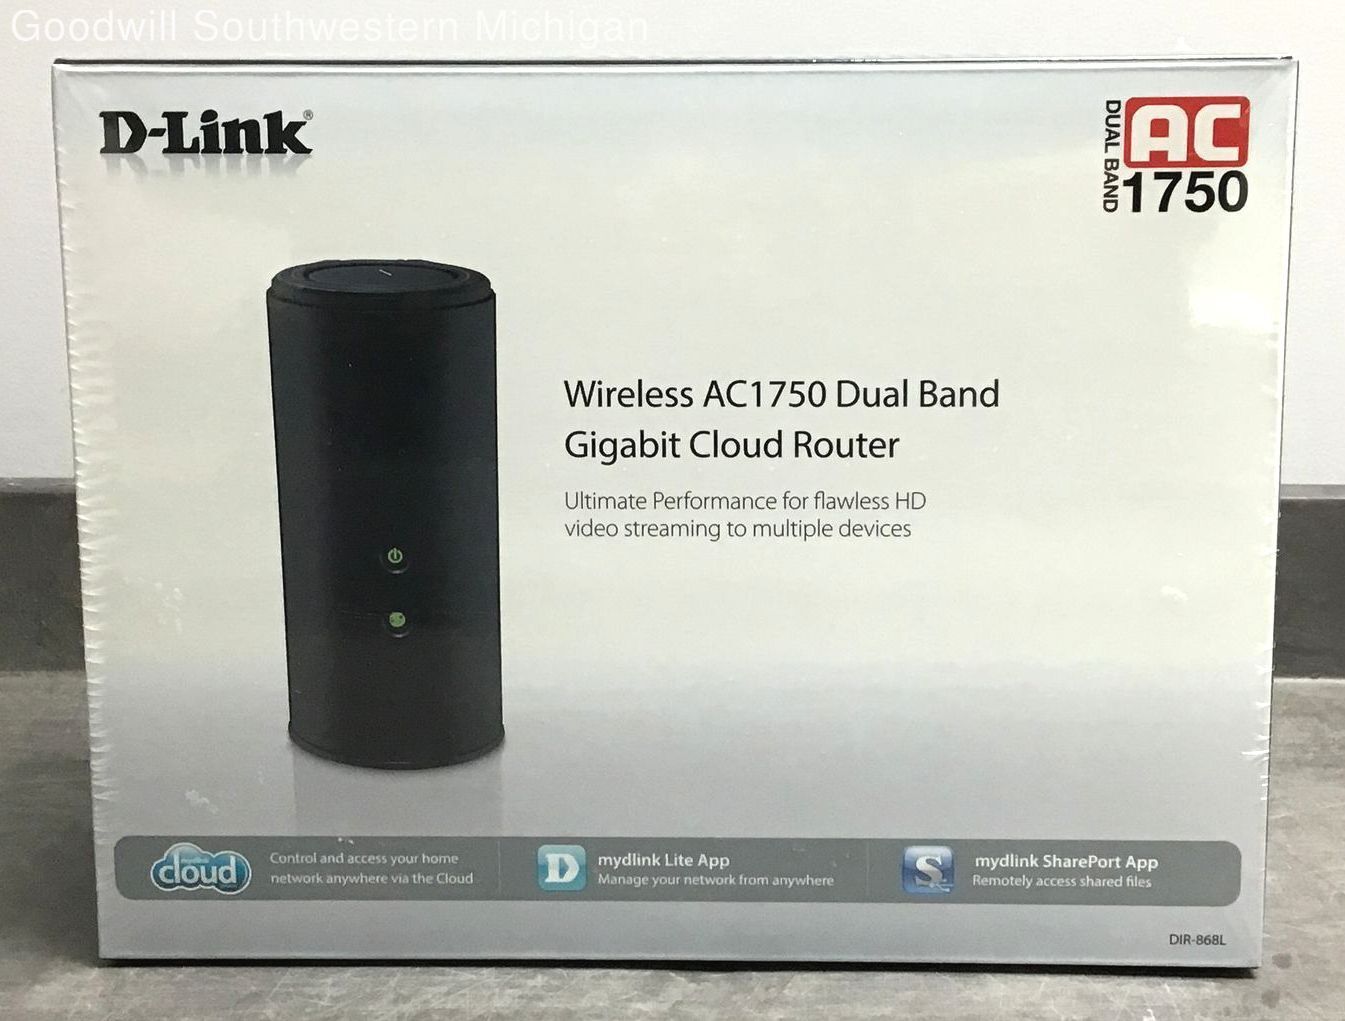 UNTESTED D-Link Wireless AC1750 Dual Band Gigabit Cloud Router - New and Sealed